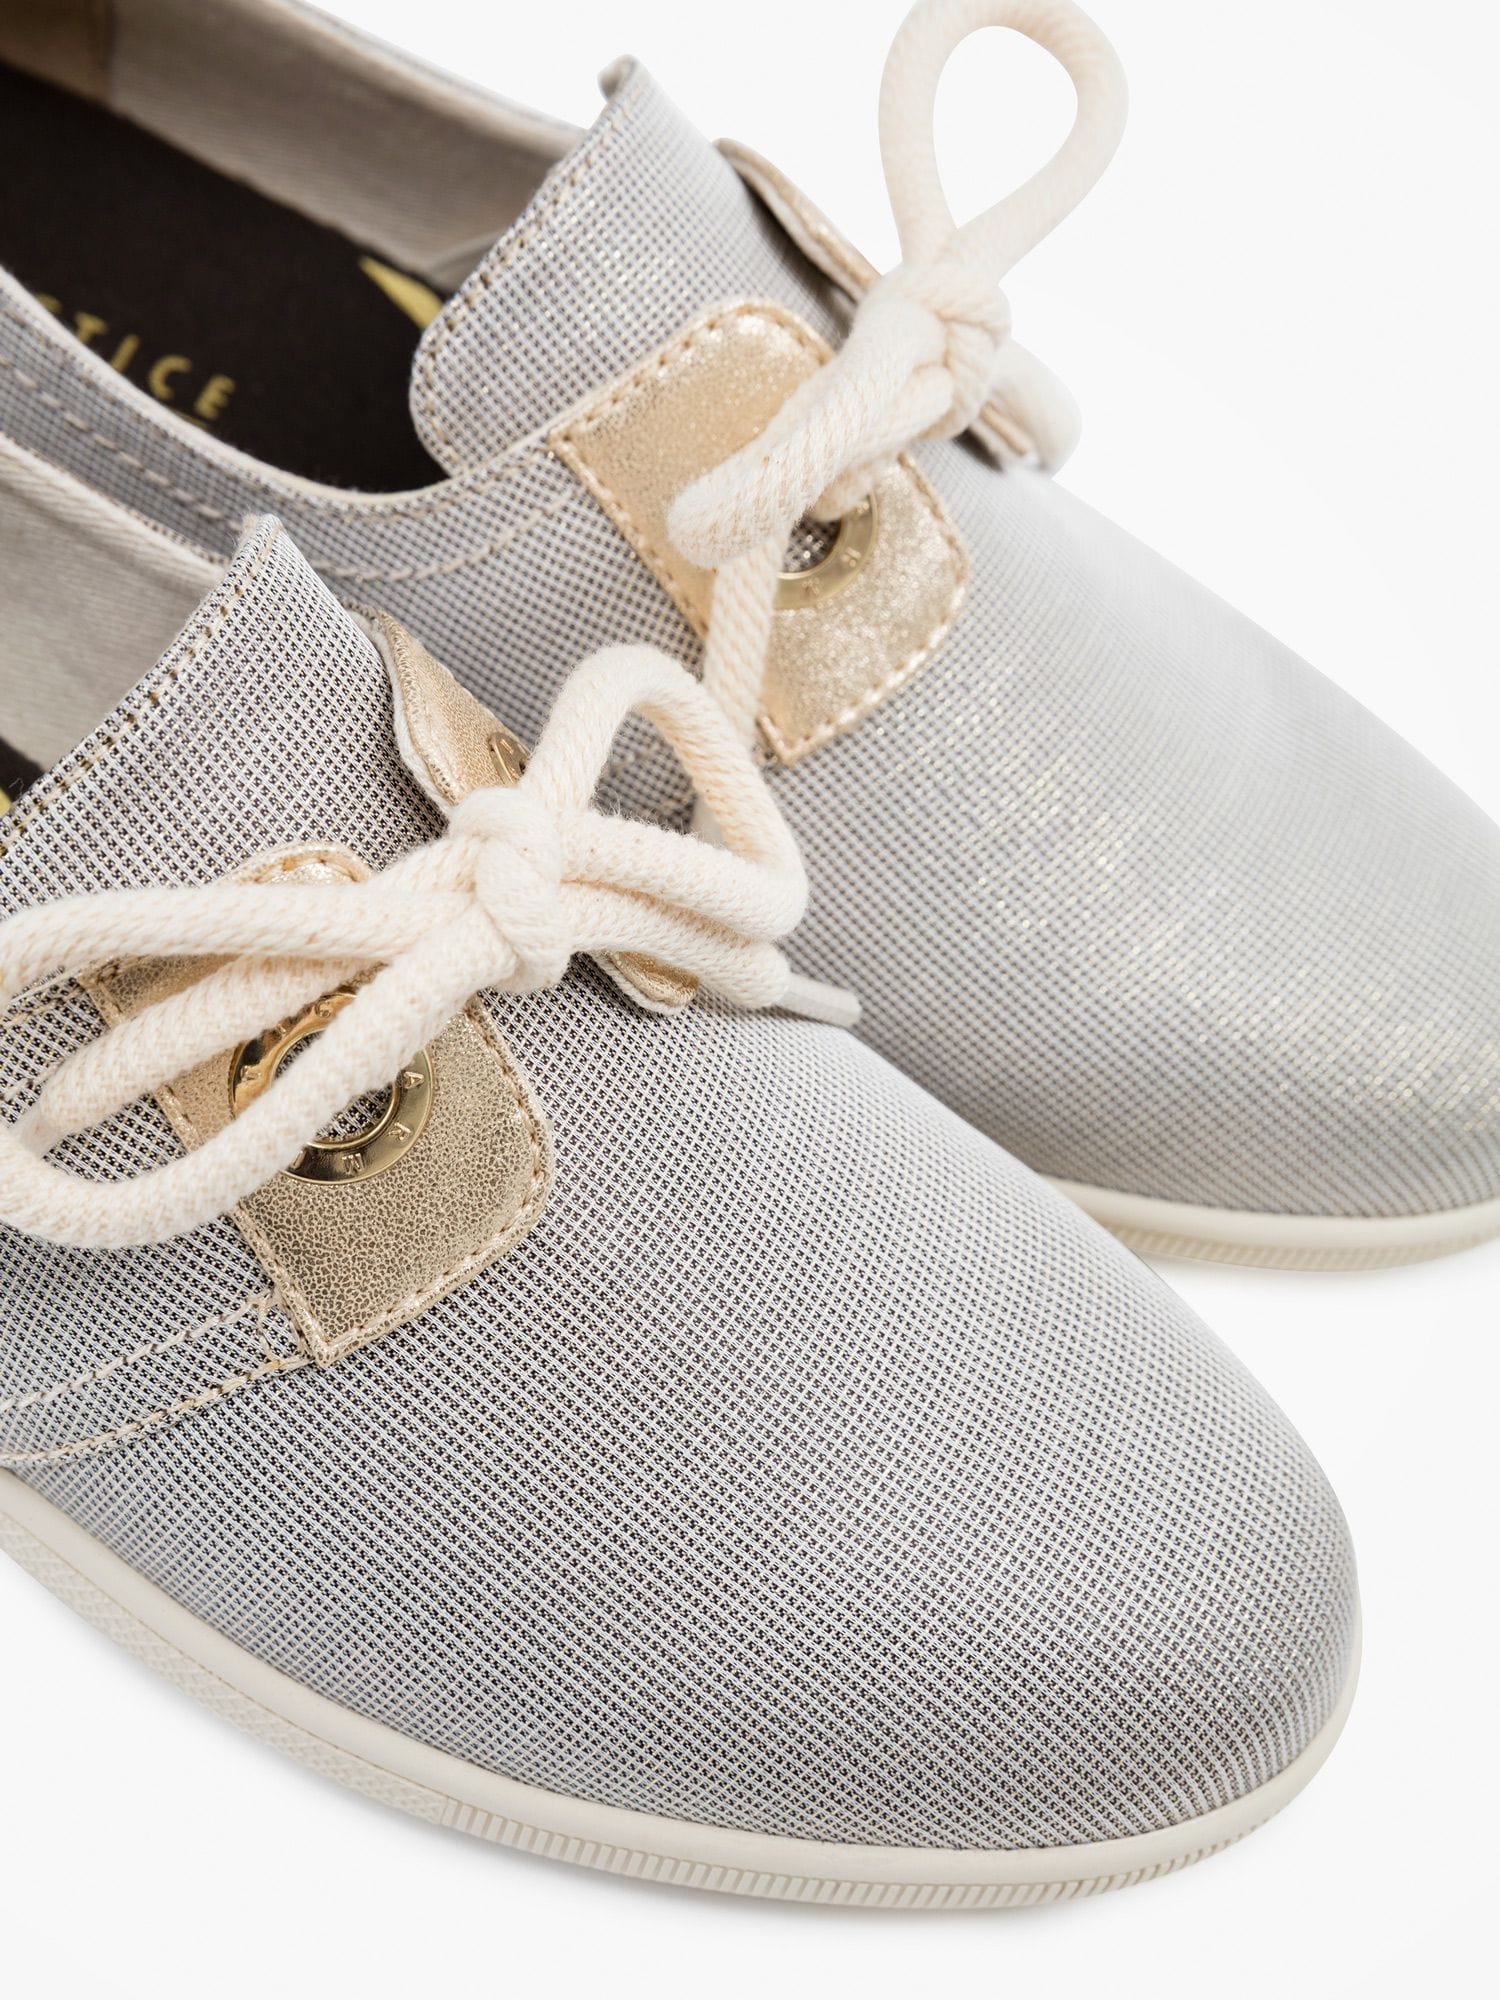 Gold eyelets, marine-inspired cord laces, leather yokes and a neo-retro spirit are the hallmarks of this Made in France sneaker.